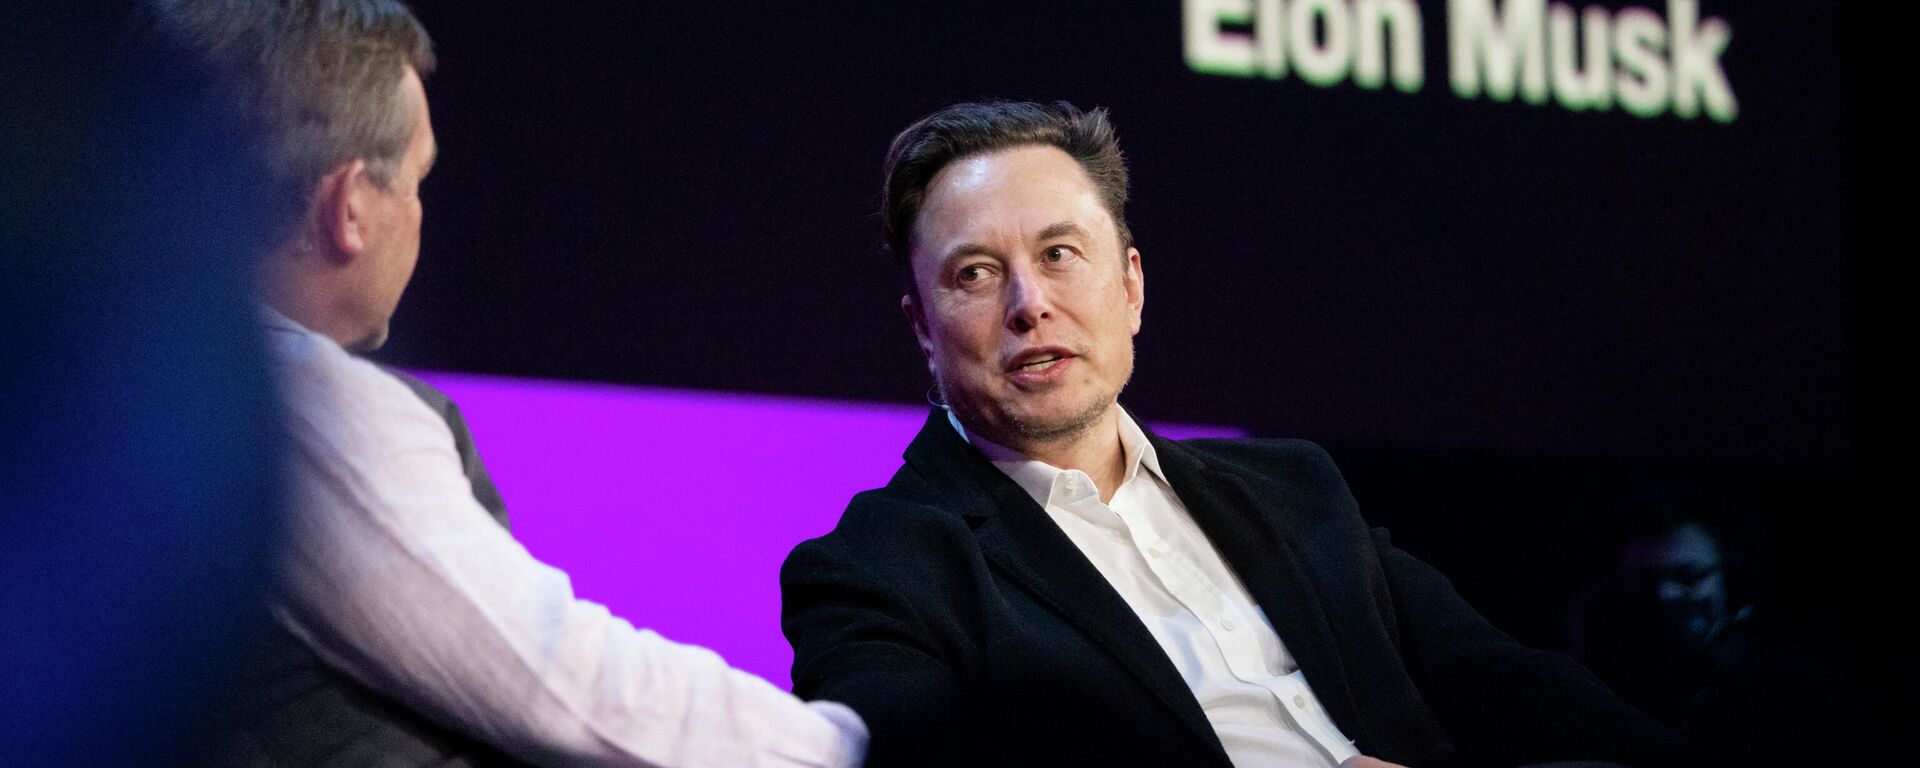 This handout image released by TED Conferences shows Tesla chief Elon Musk (R) speaking with head of TED Chris Anderson at the TED2022: A New Era conference in Vancouver, Canada, April 14, 2022. - Sputnik International, 1920, 04.05.2022